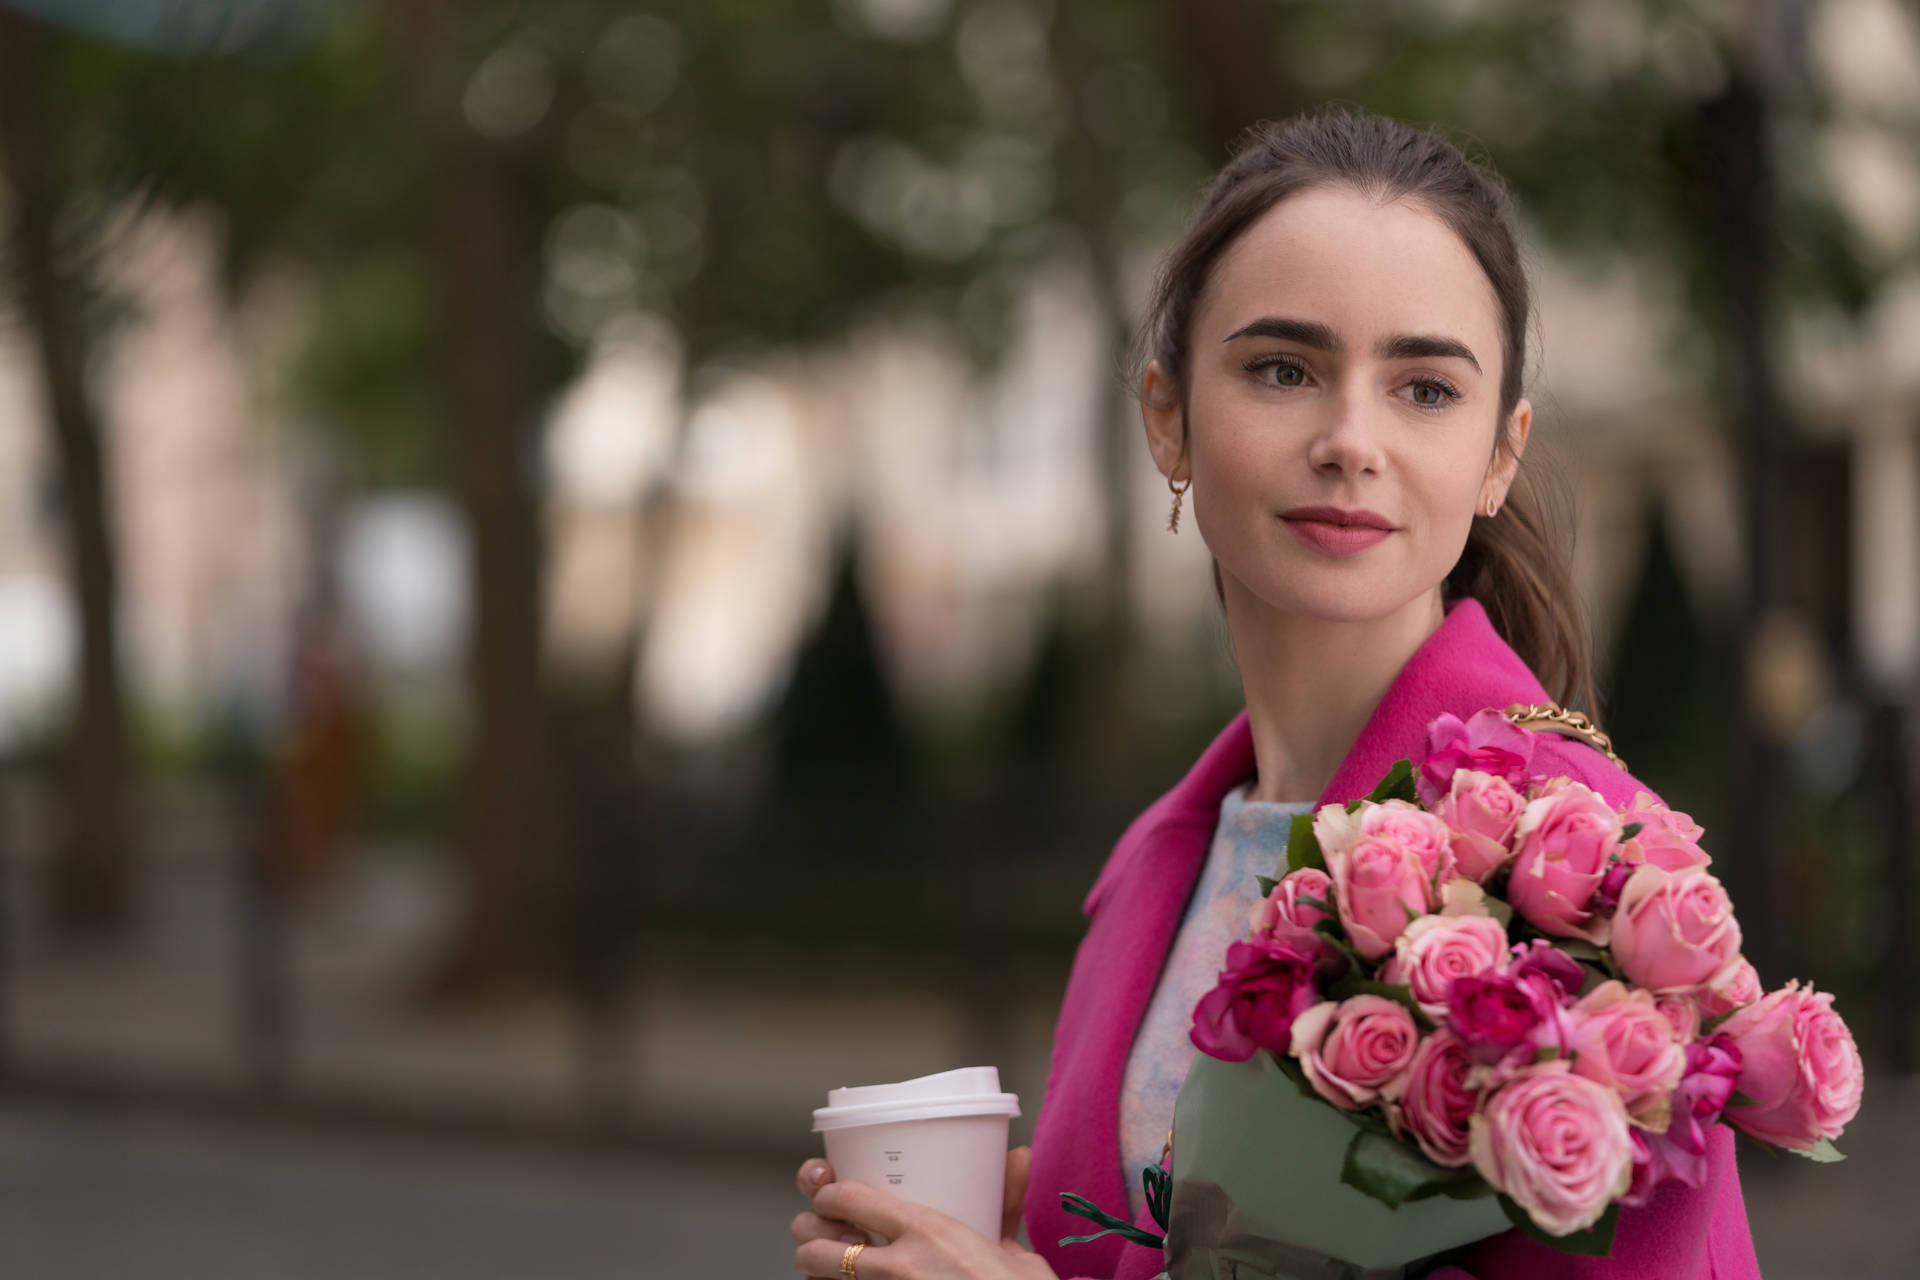 Emily Bloom In Paris, Strolling With Pink Roses. Background